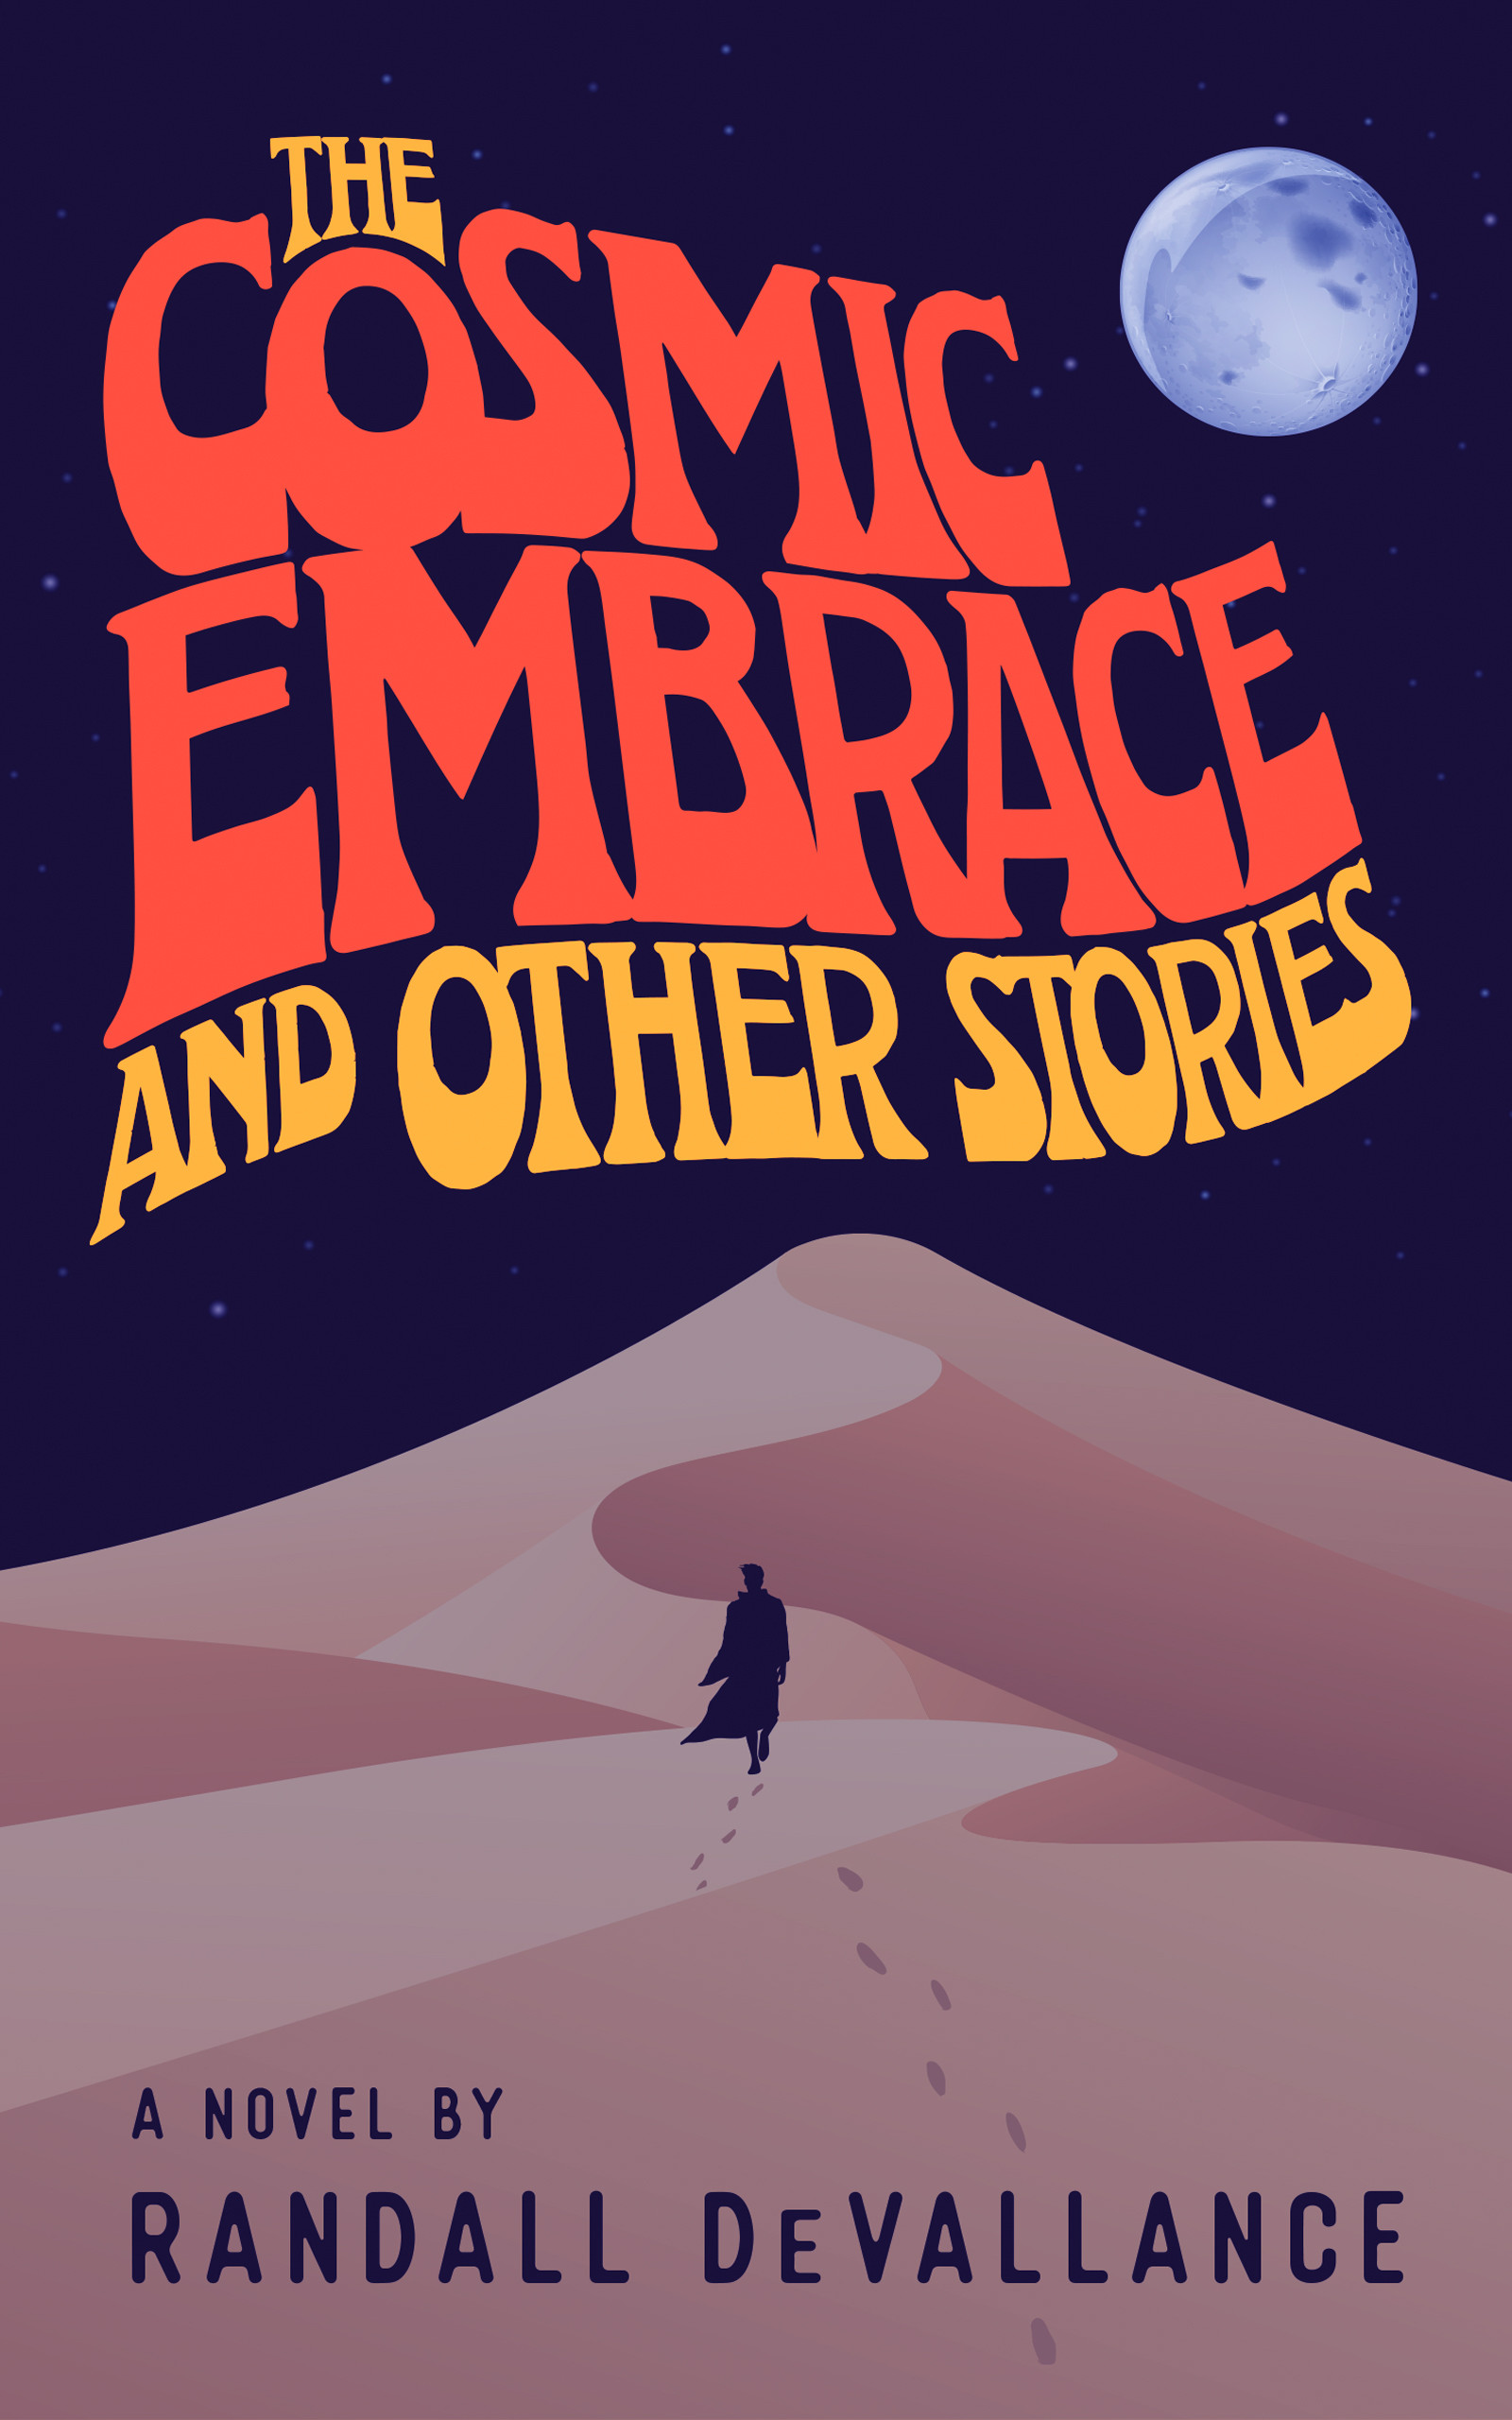 The Cosmic Embrace and Other Stories